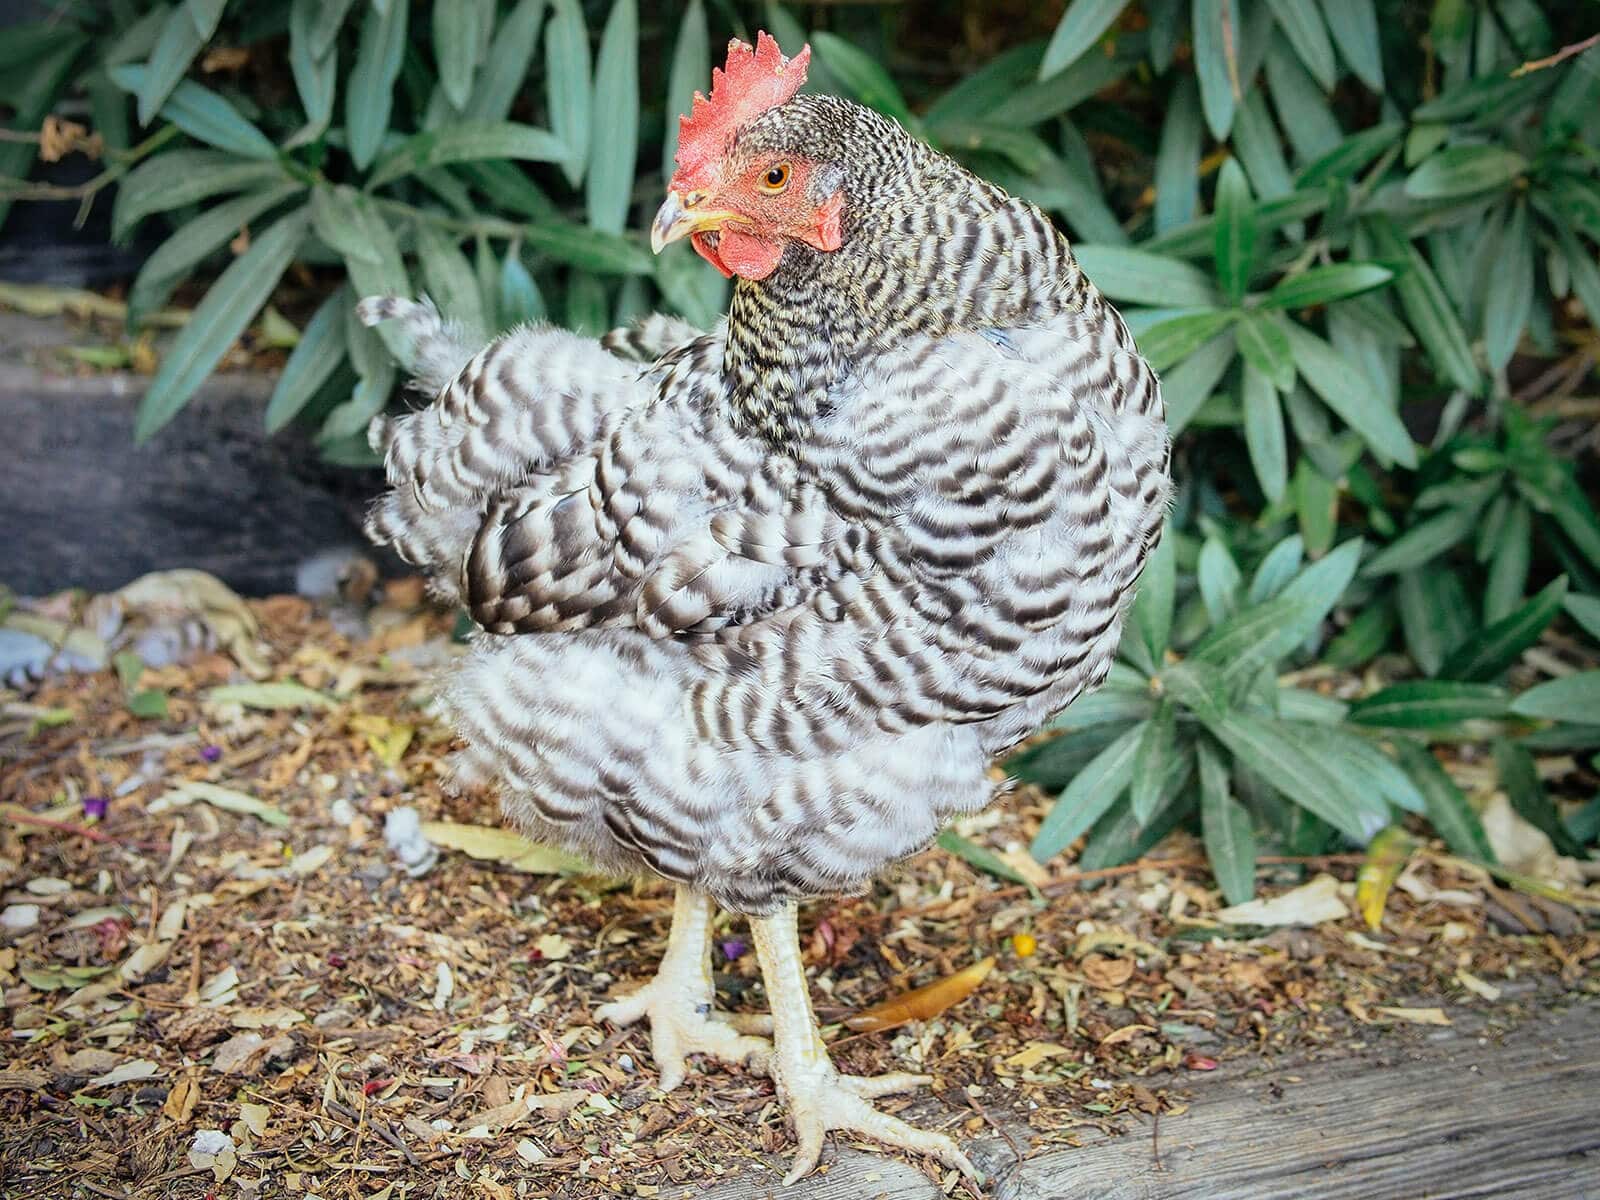 Barred Rock in the beginning stages of a seasonal molt